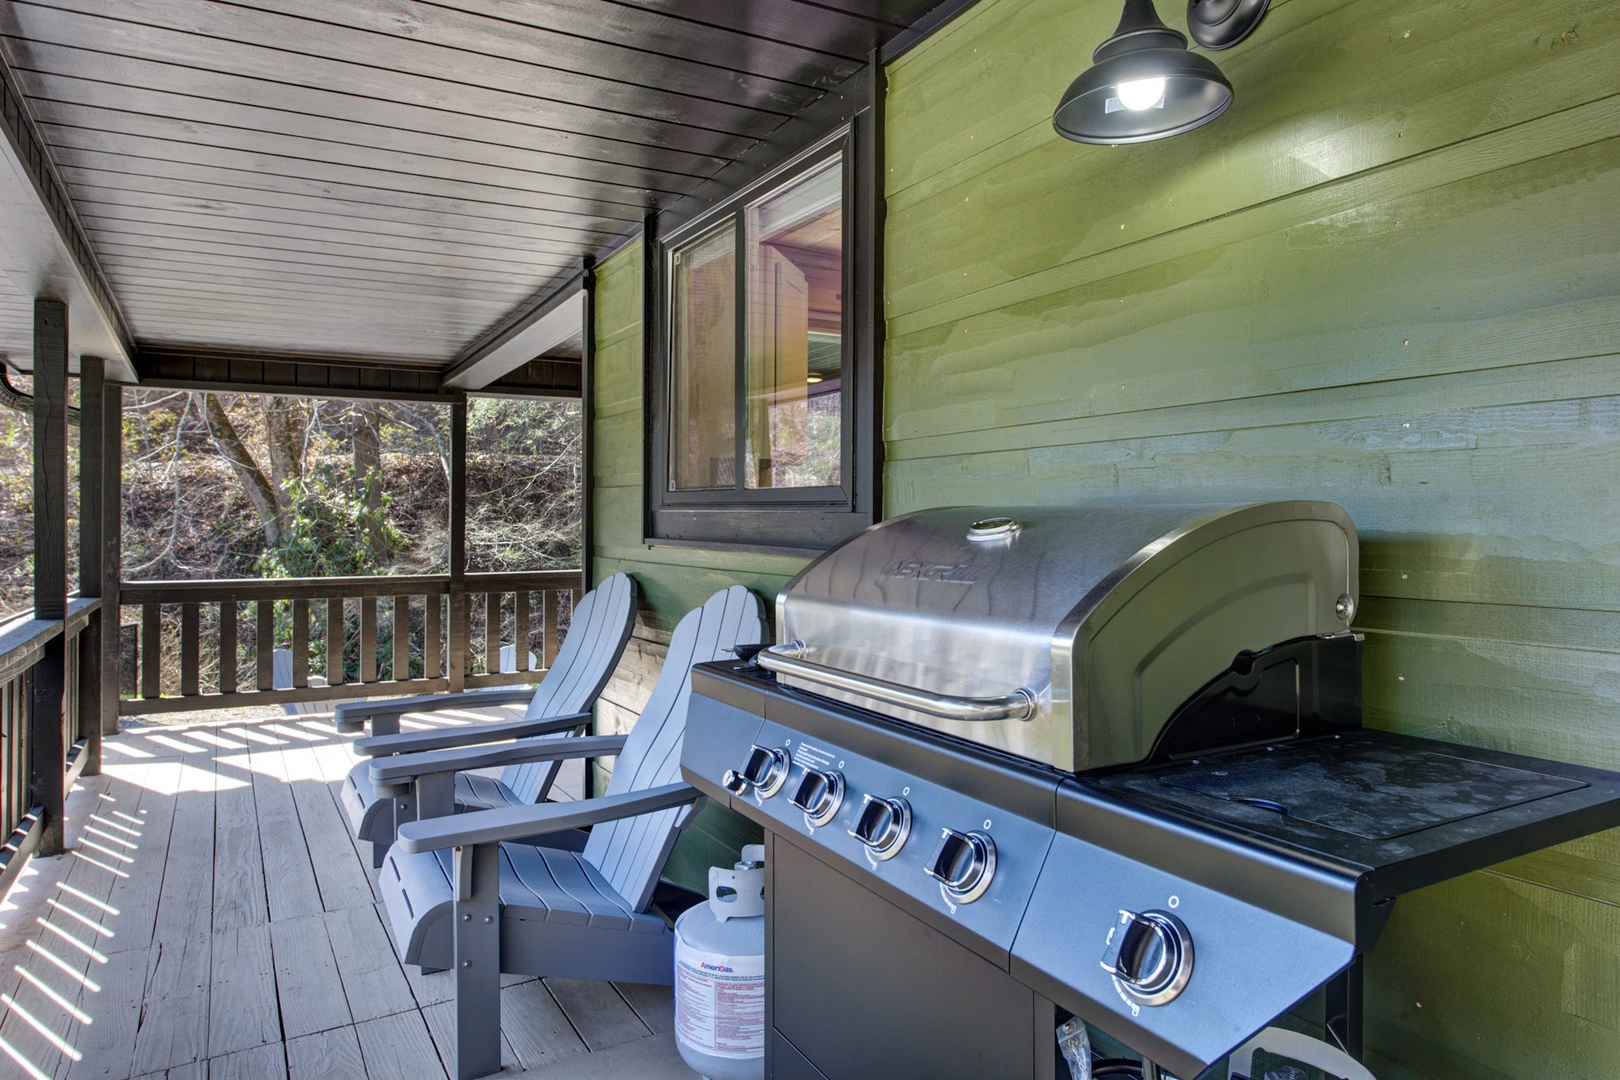 Kick back on the porch with a morning coffee or evening barbecue, enjoying the easy rhythm of cabin life